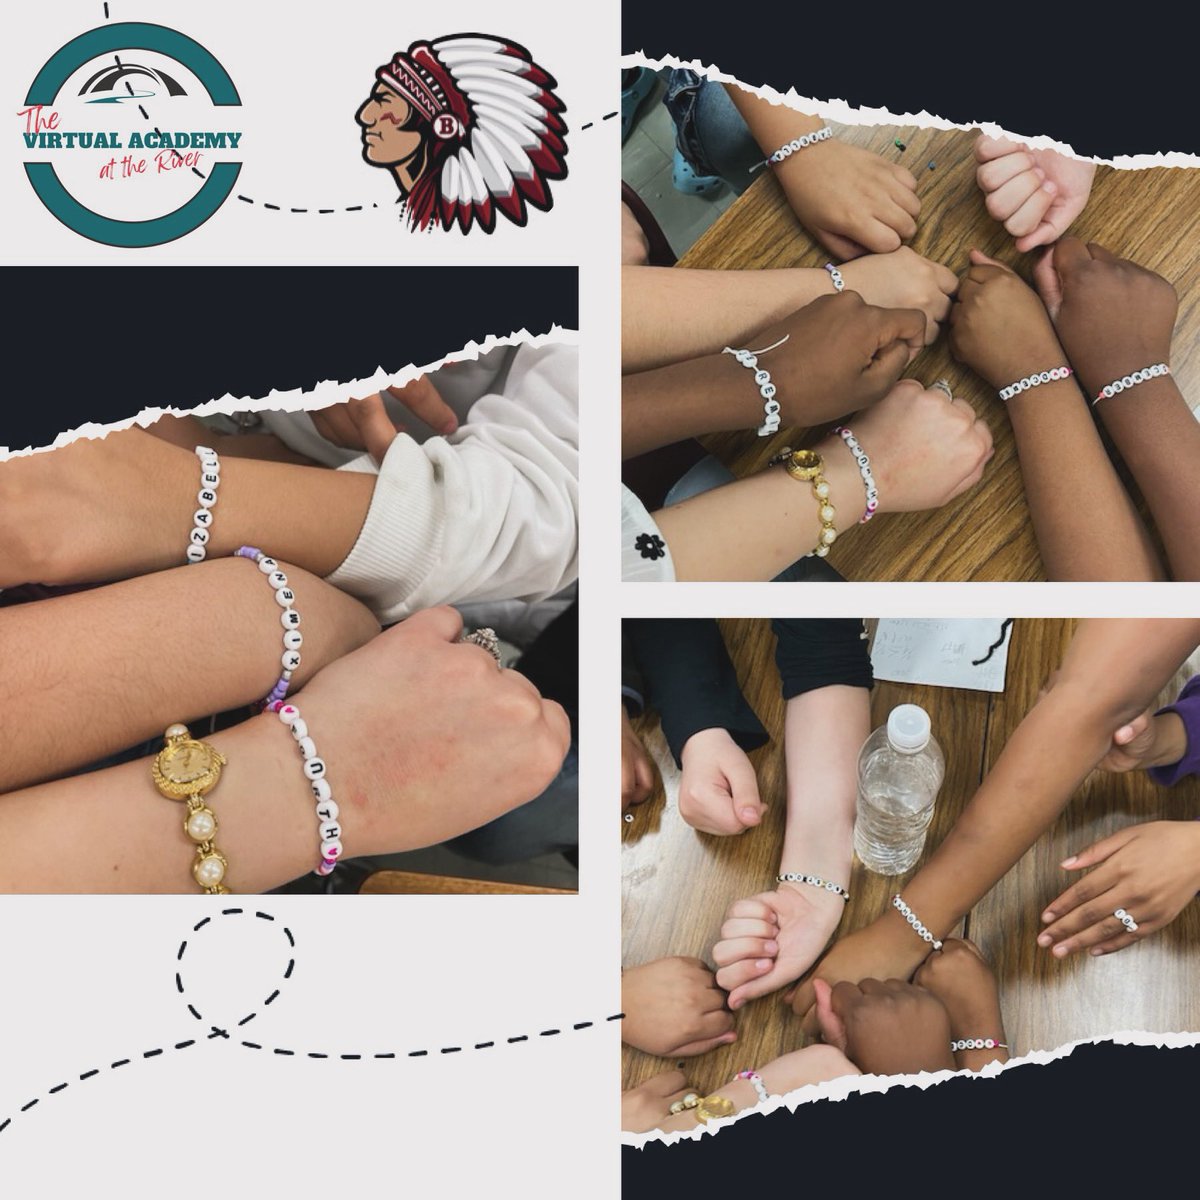 Last week our teachers visited Blytheville for testing. After testing the students got to make friendship bracelets. We love our students! 

#thevirtualacademyattheriver #digitallearning #distancelearning #VirtualLearning #weloveourstudents